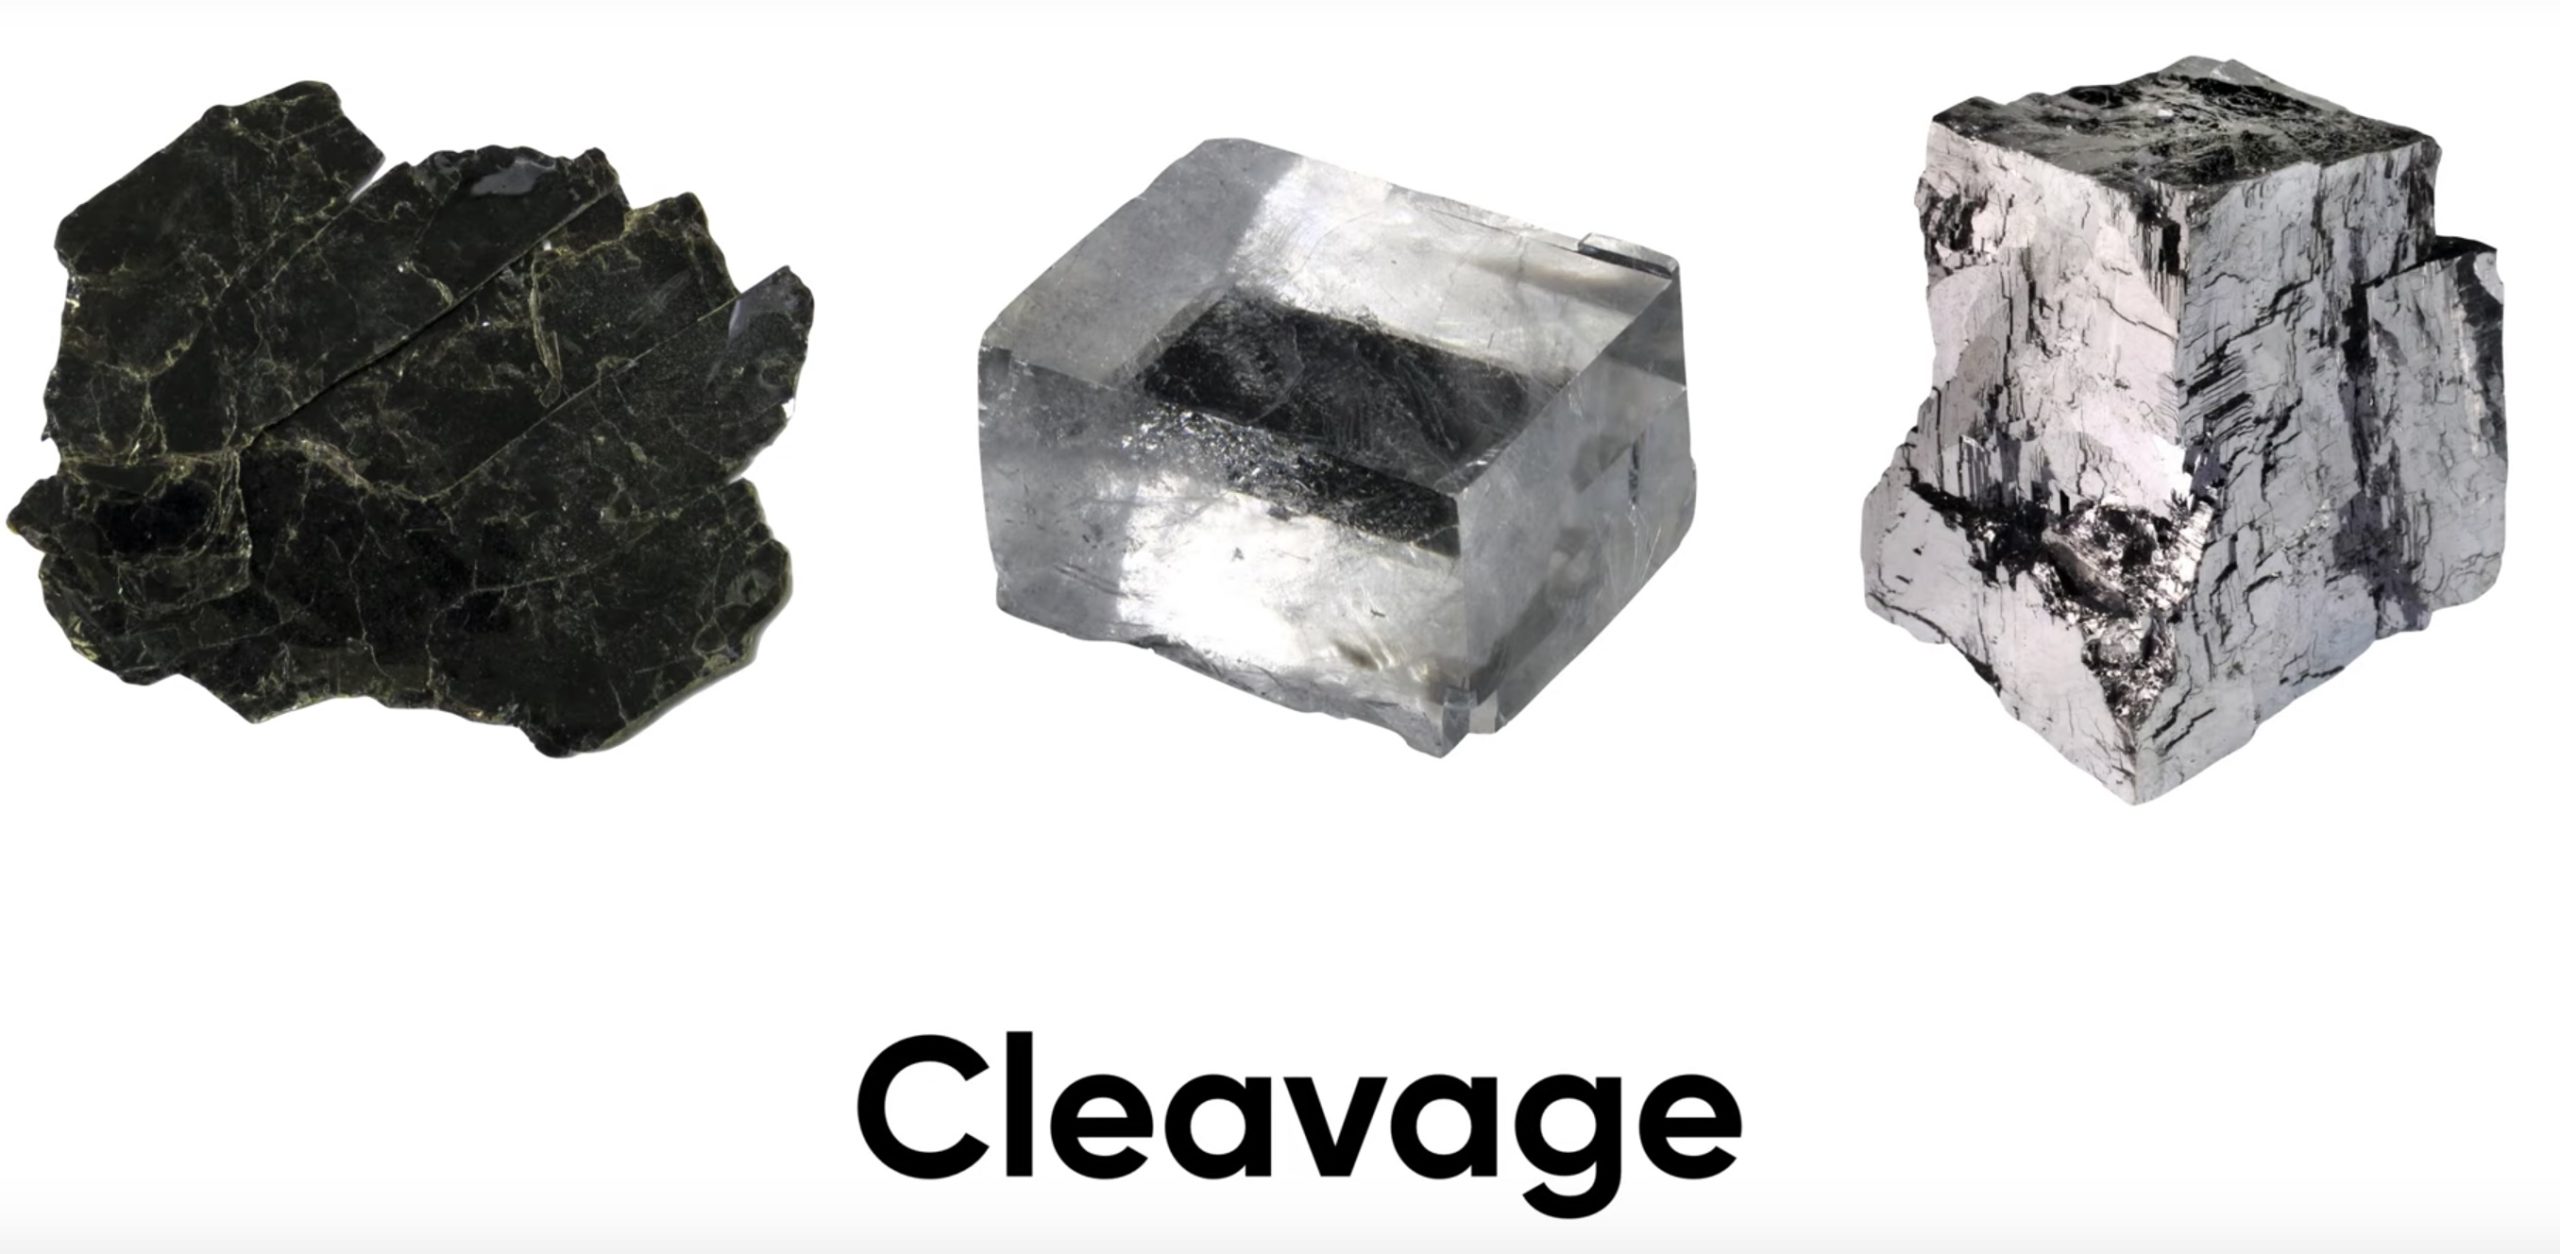 https://opengeology.org/historicalgeology/wp-content/uploads/2020/01/Cleavage-scaled.jpg